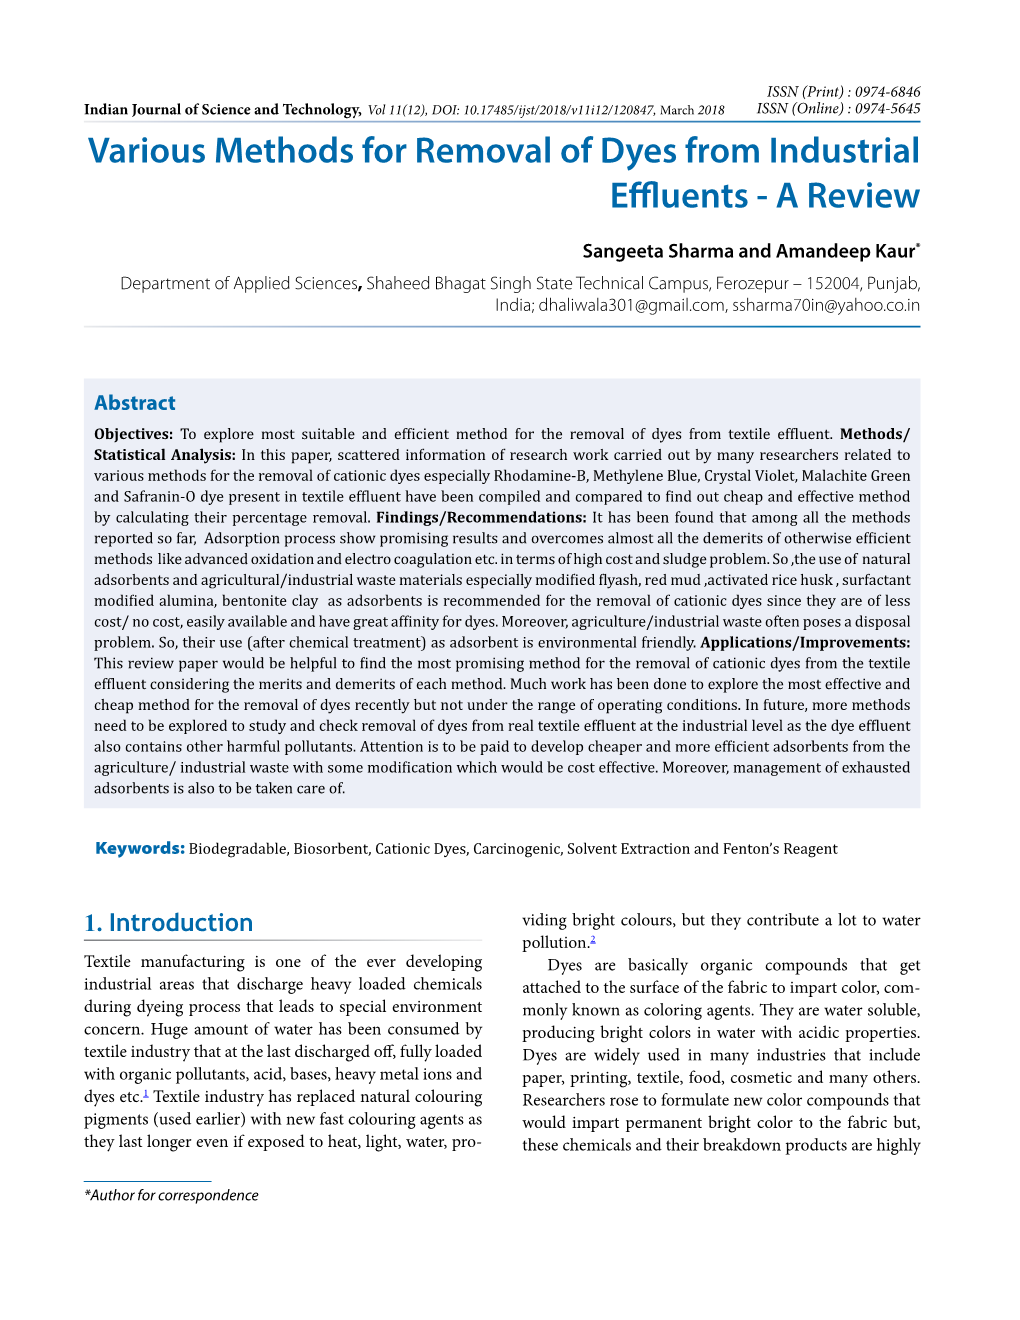 Various Methods for Removal of Dyes from Industrial Effluents - a Review